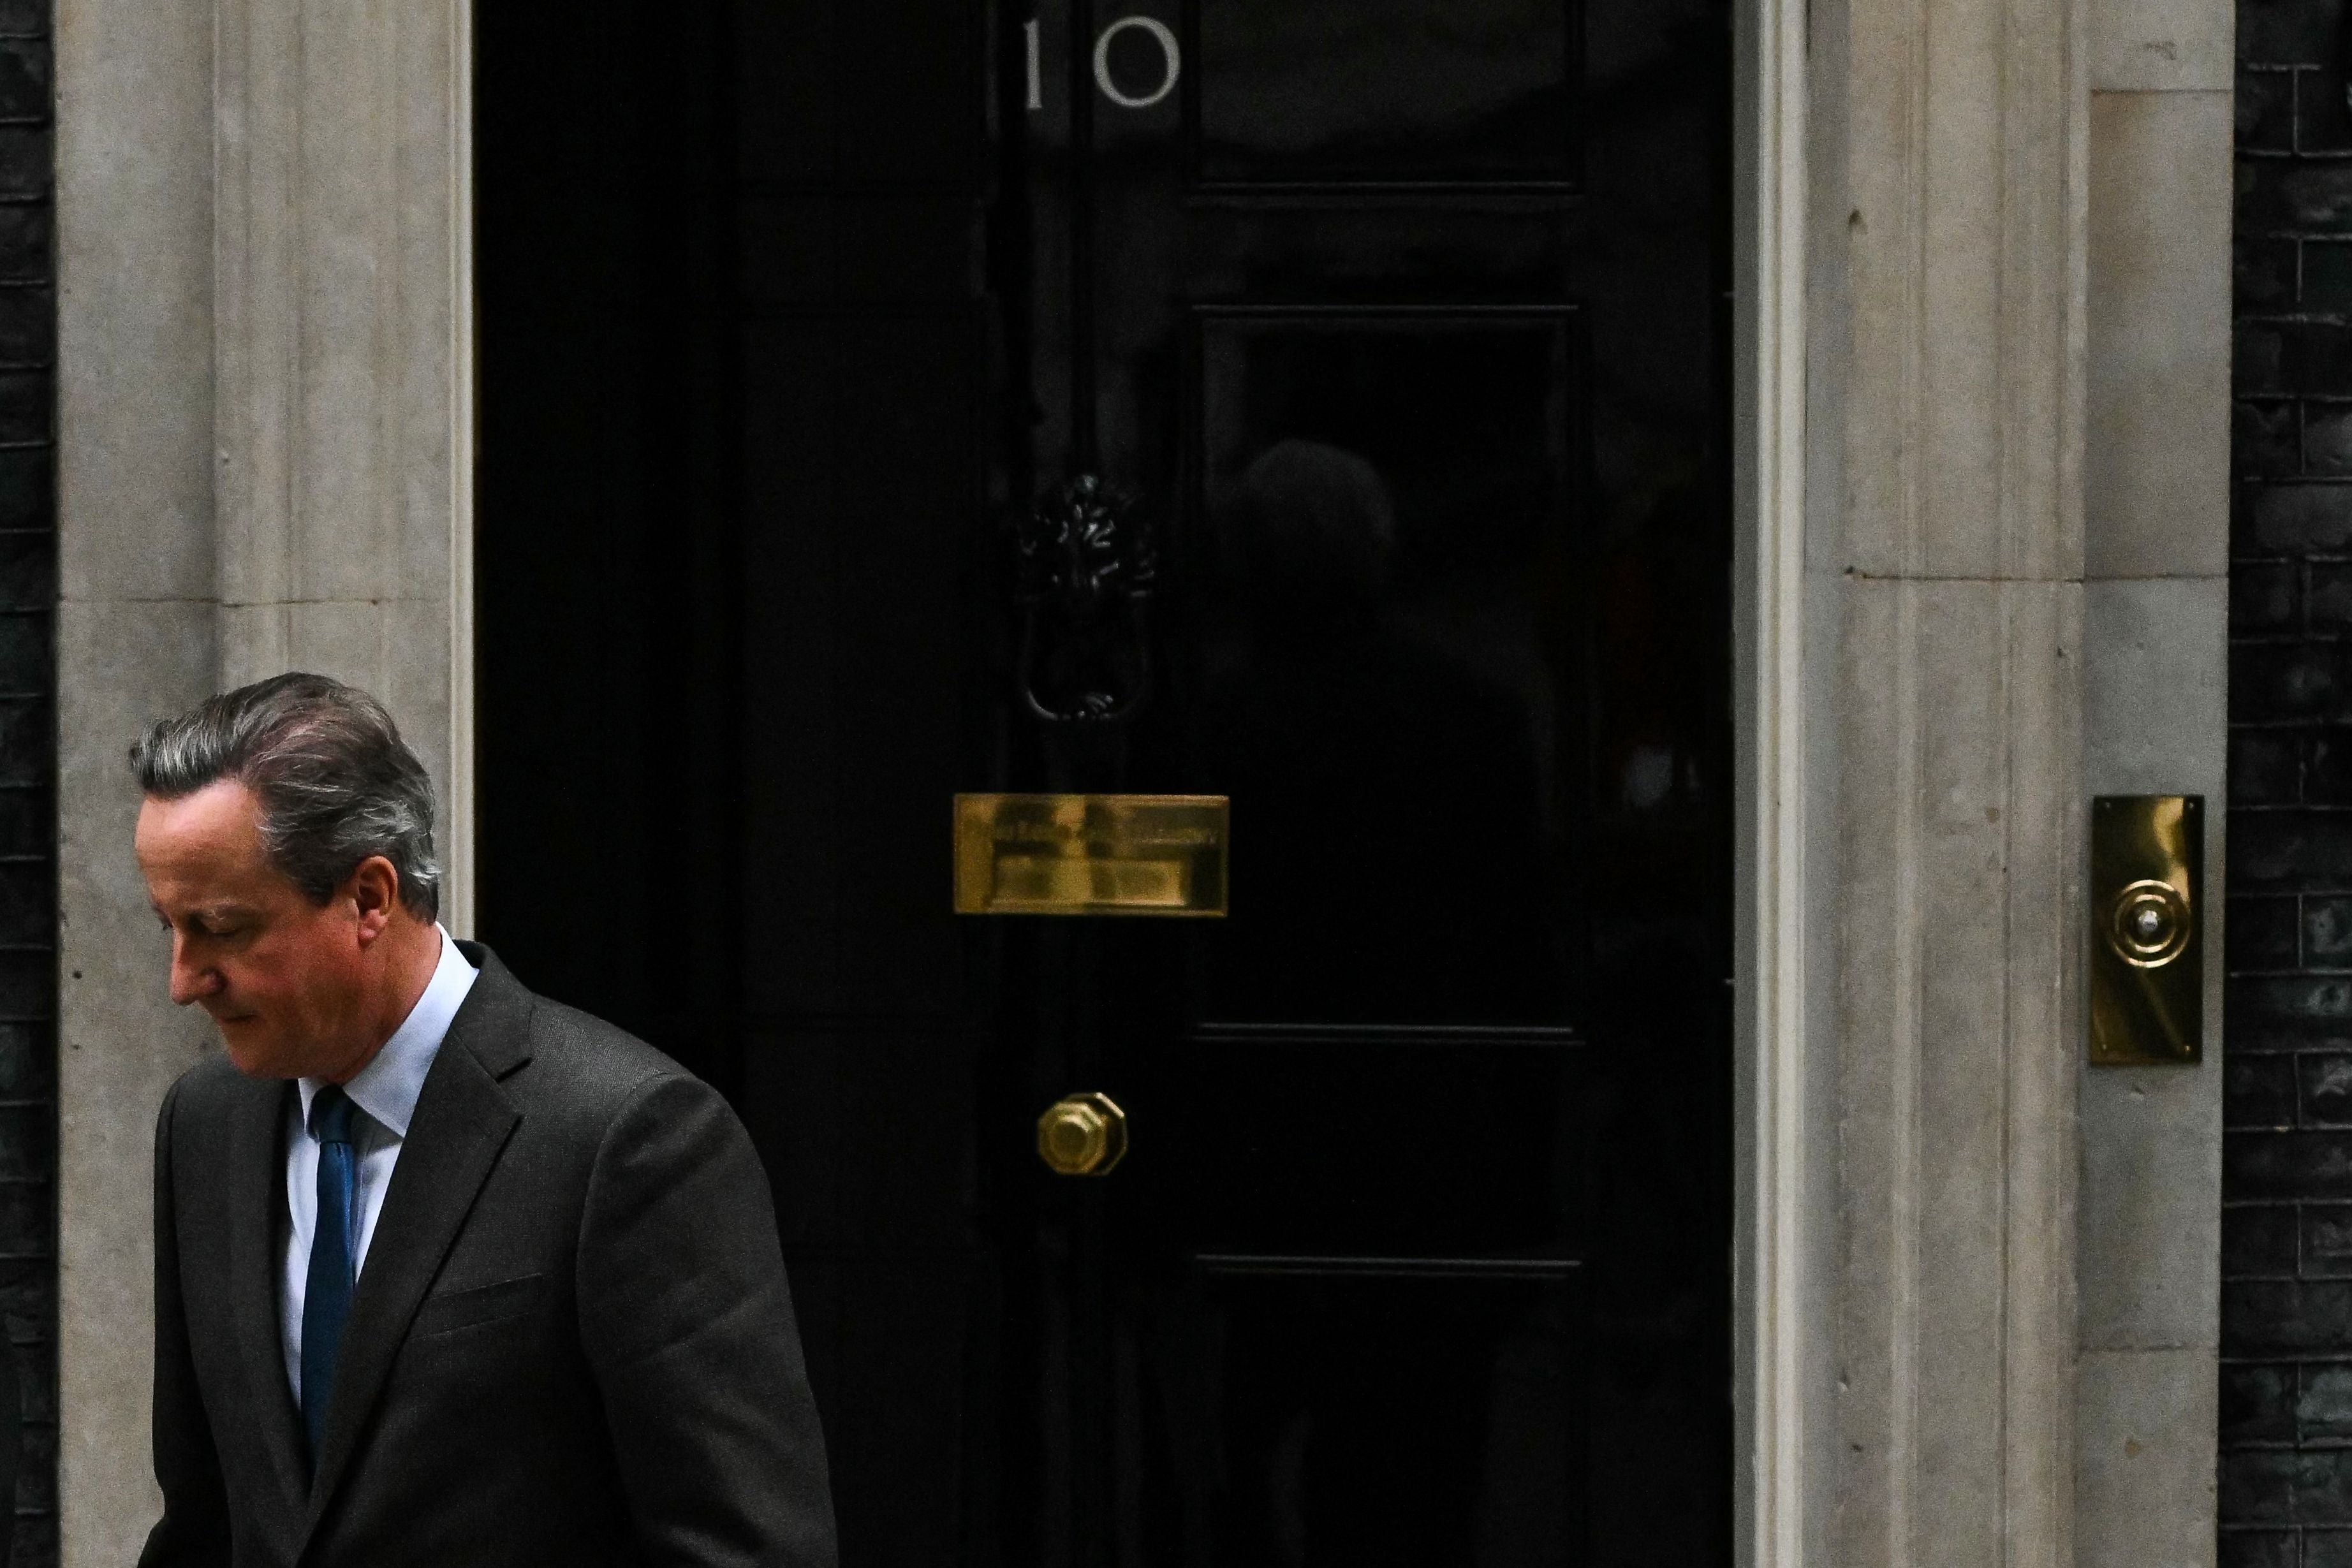 David Cameron returned to government with a role as foreign secretary